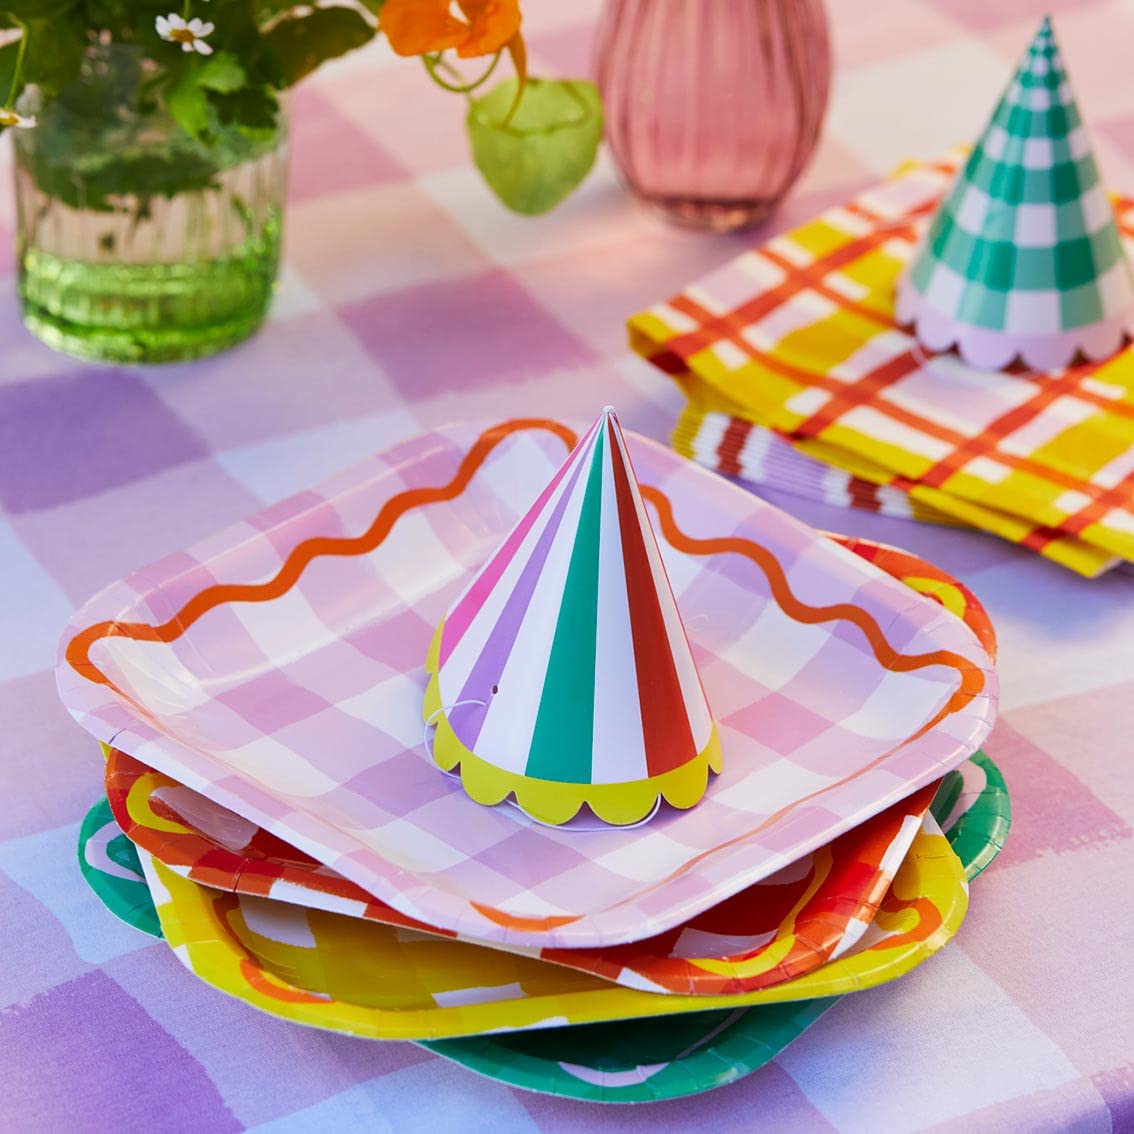 Talking Tables Gingham Square Disposable Strong Party Plates Colourful Paper Tableware for Easter, Birthday Party Food, Picnic, Summer Orange, Yellow, Green and Lilax, 7', 12 Pack